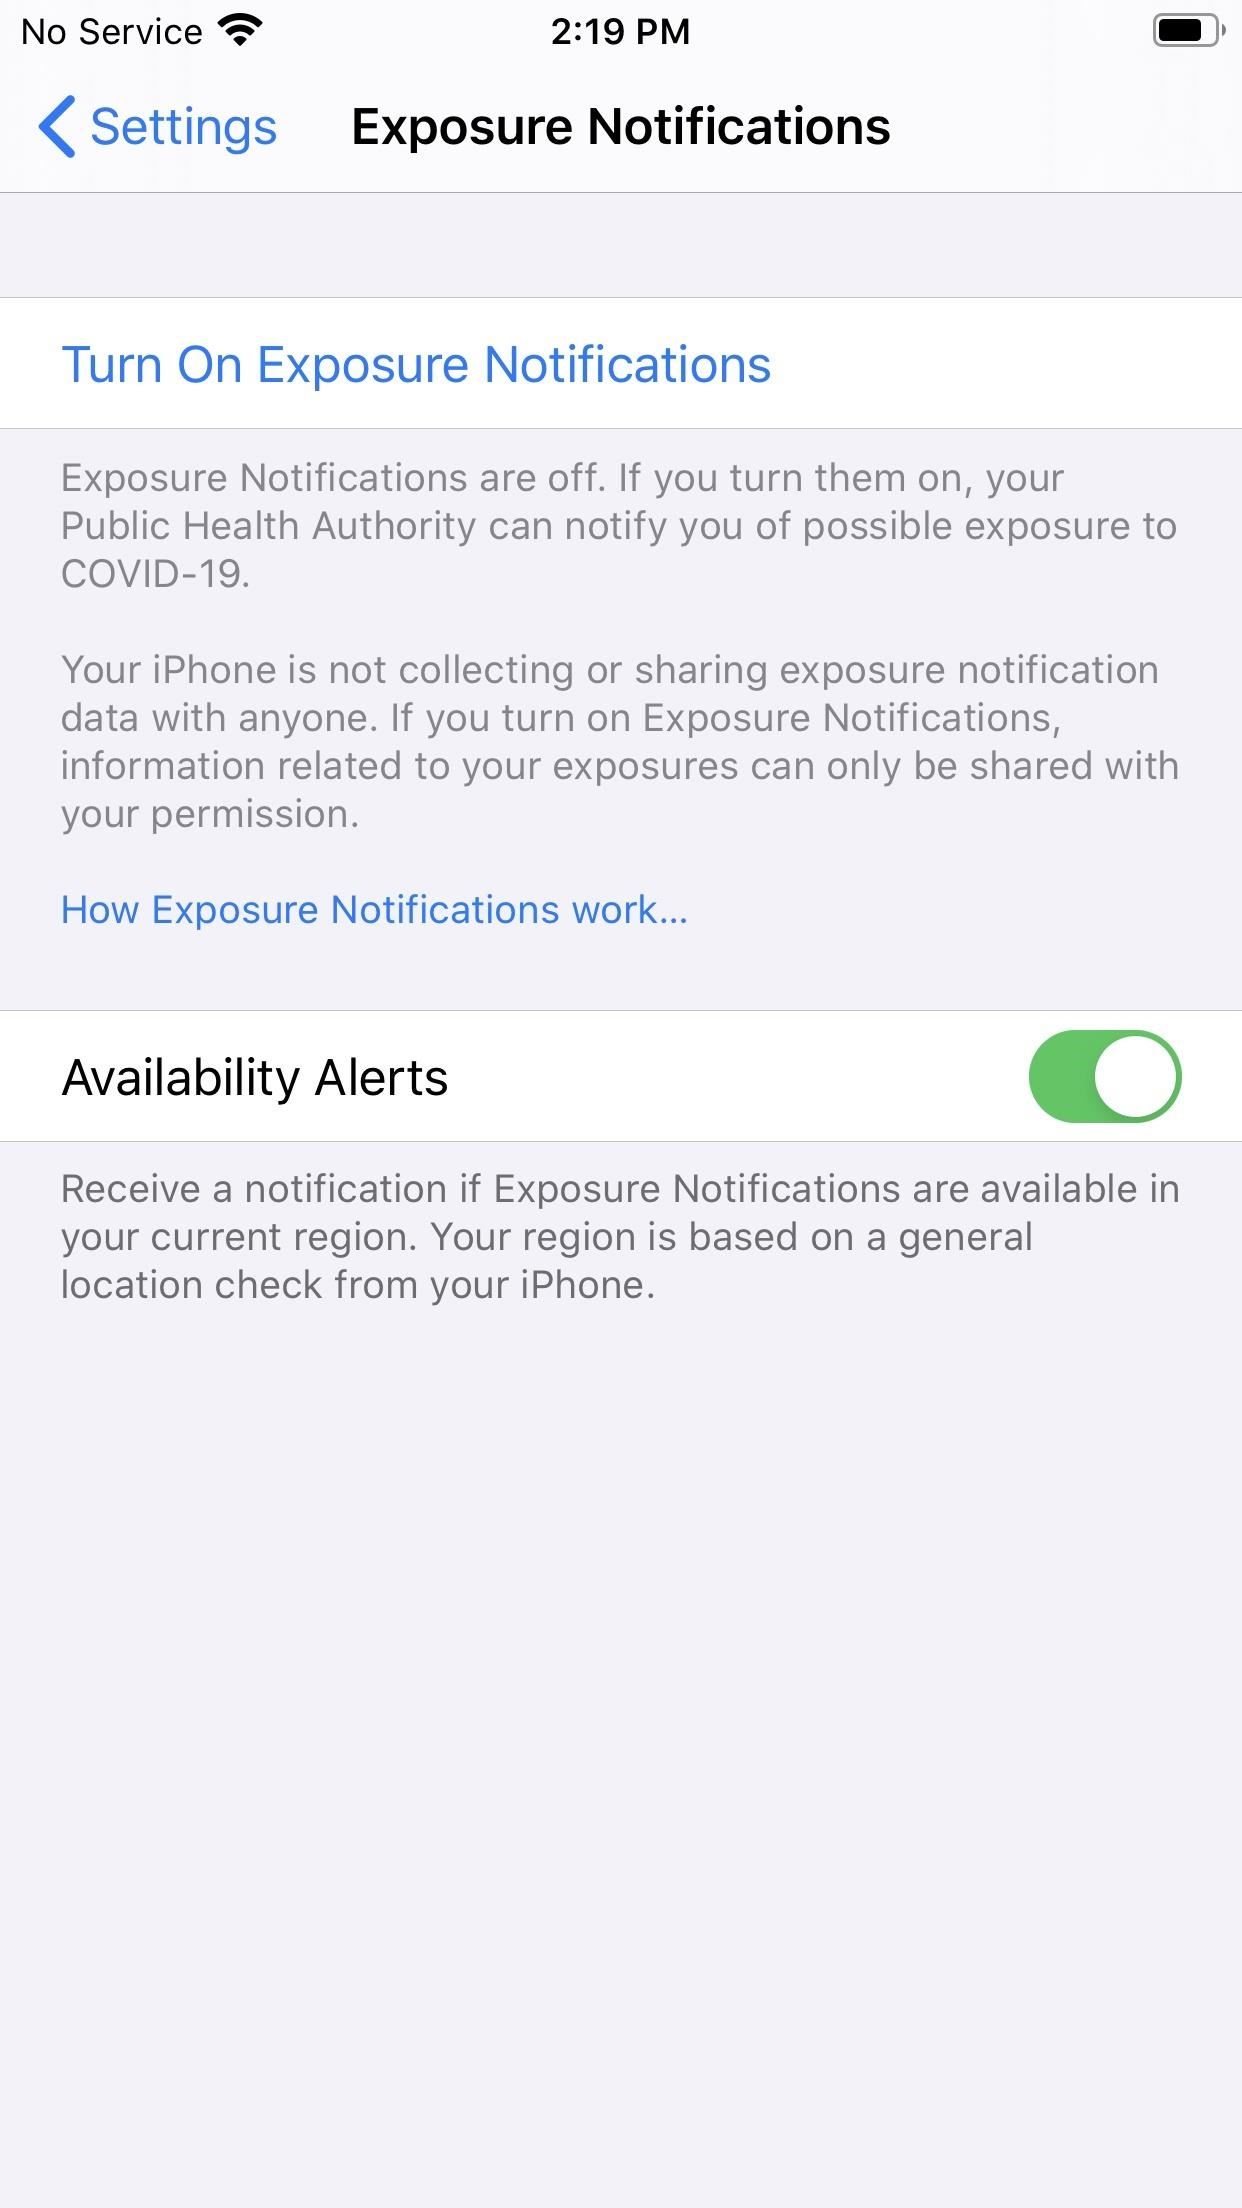 Apple Releases iOS 13.7 Beta, Includes Exposure Notification Support Without Needing an App